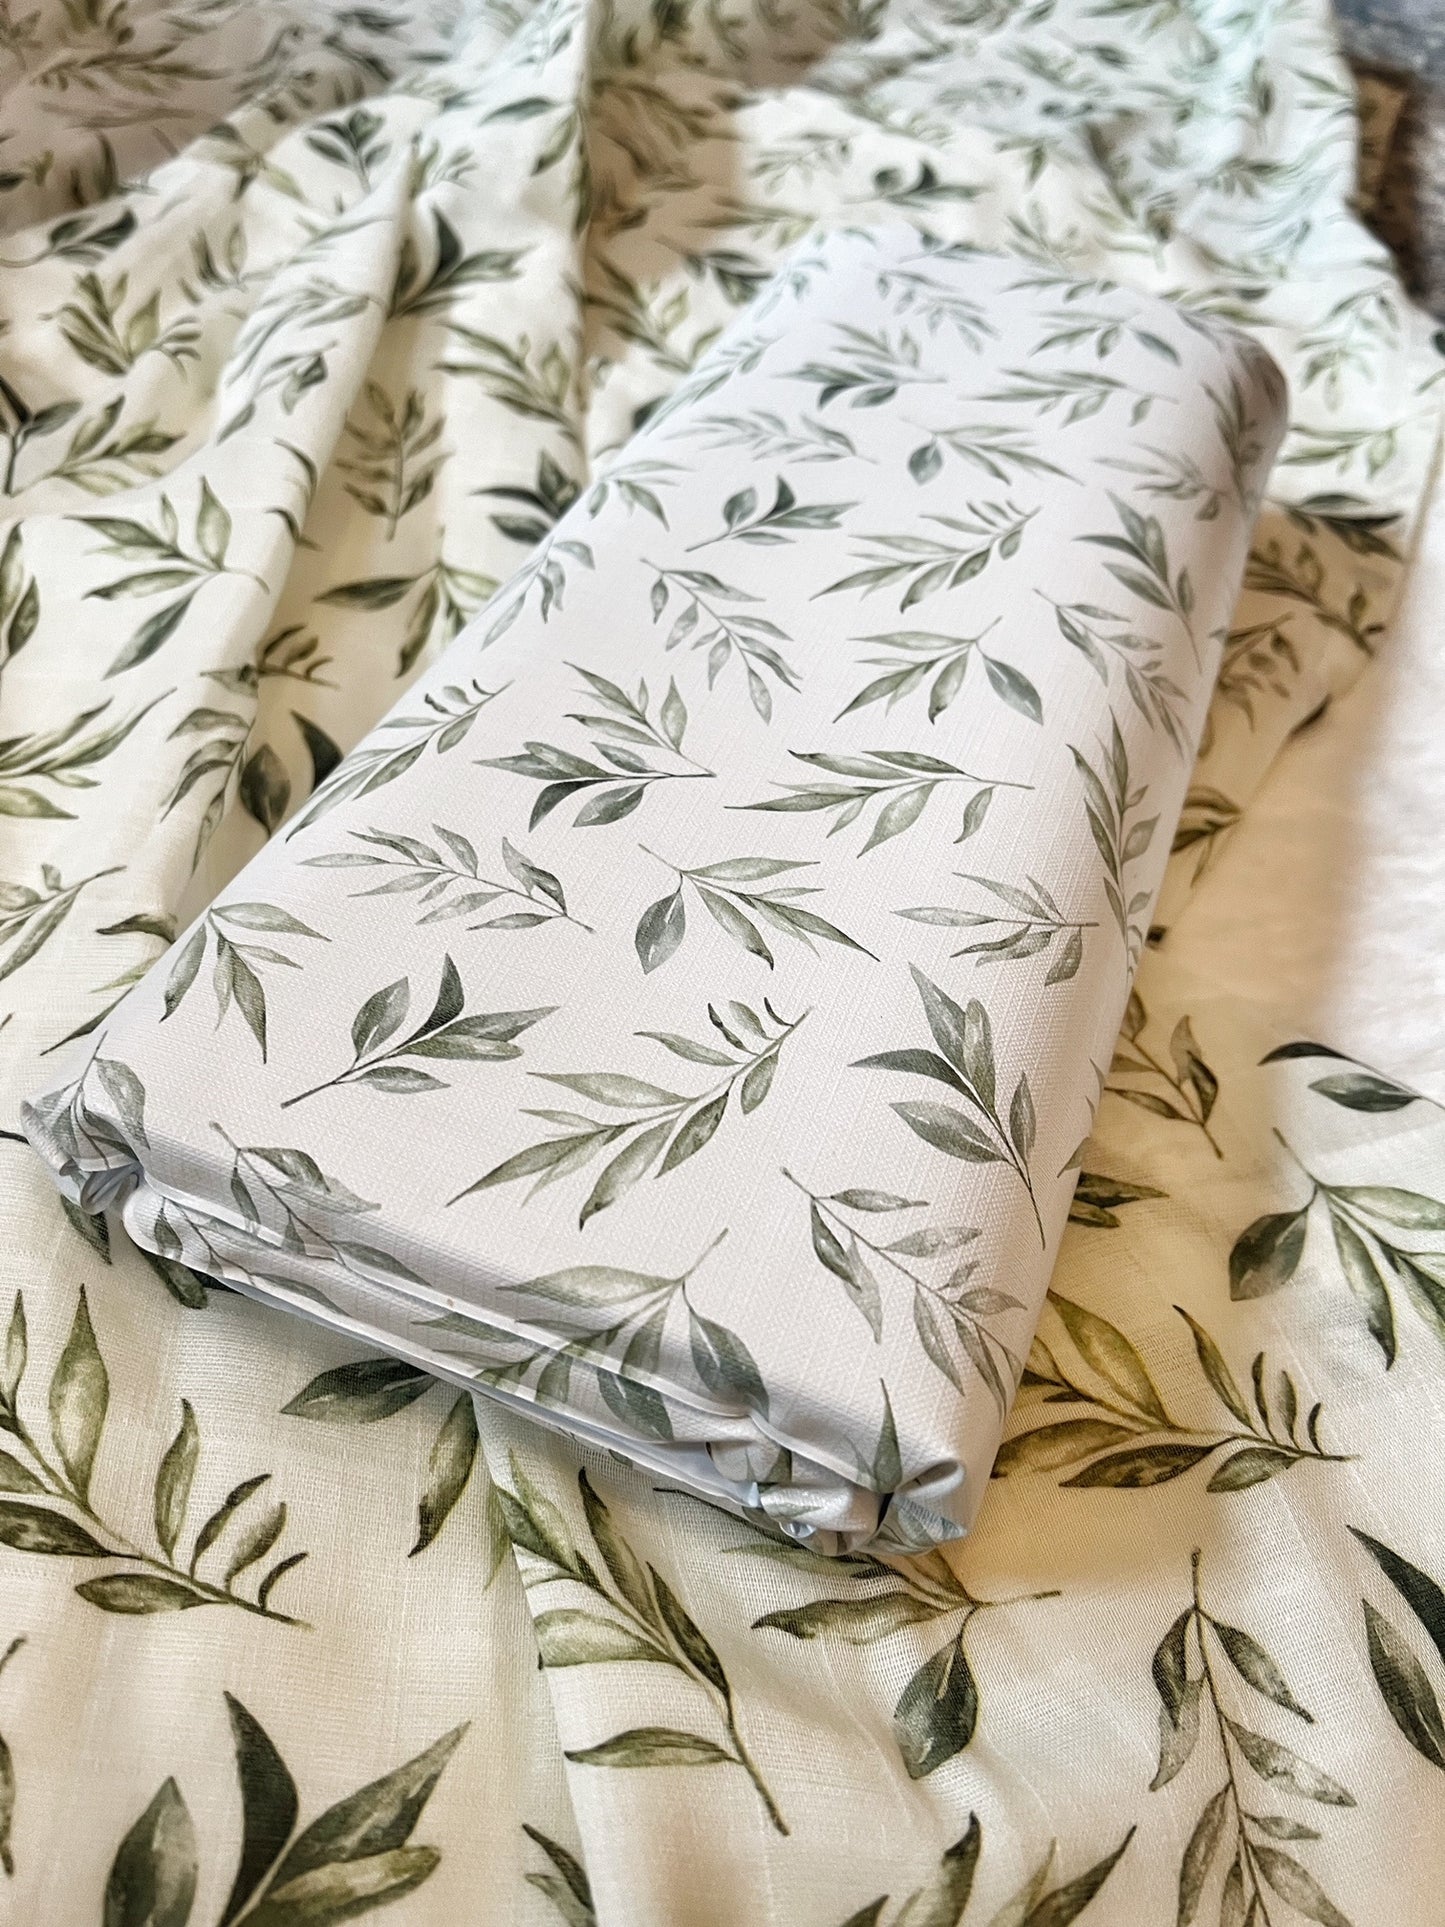 Linen Leaves Travel Changing Mat